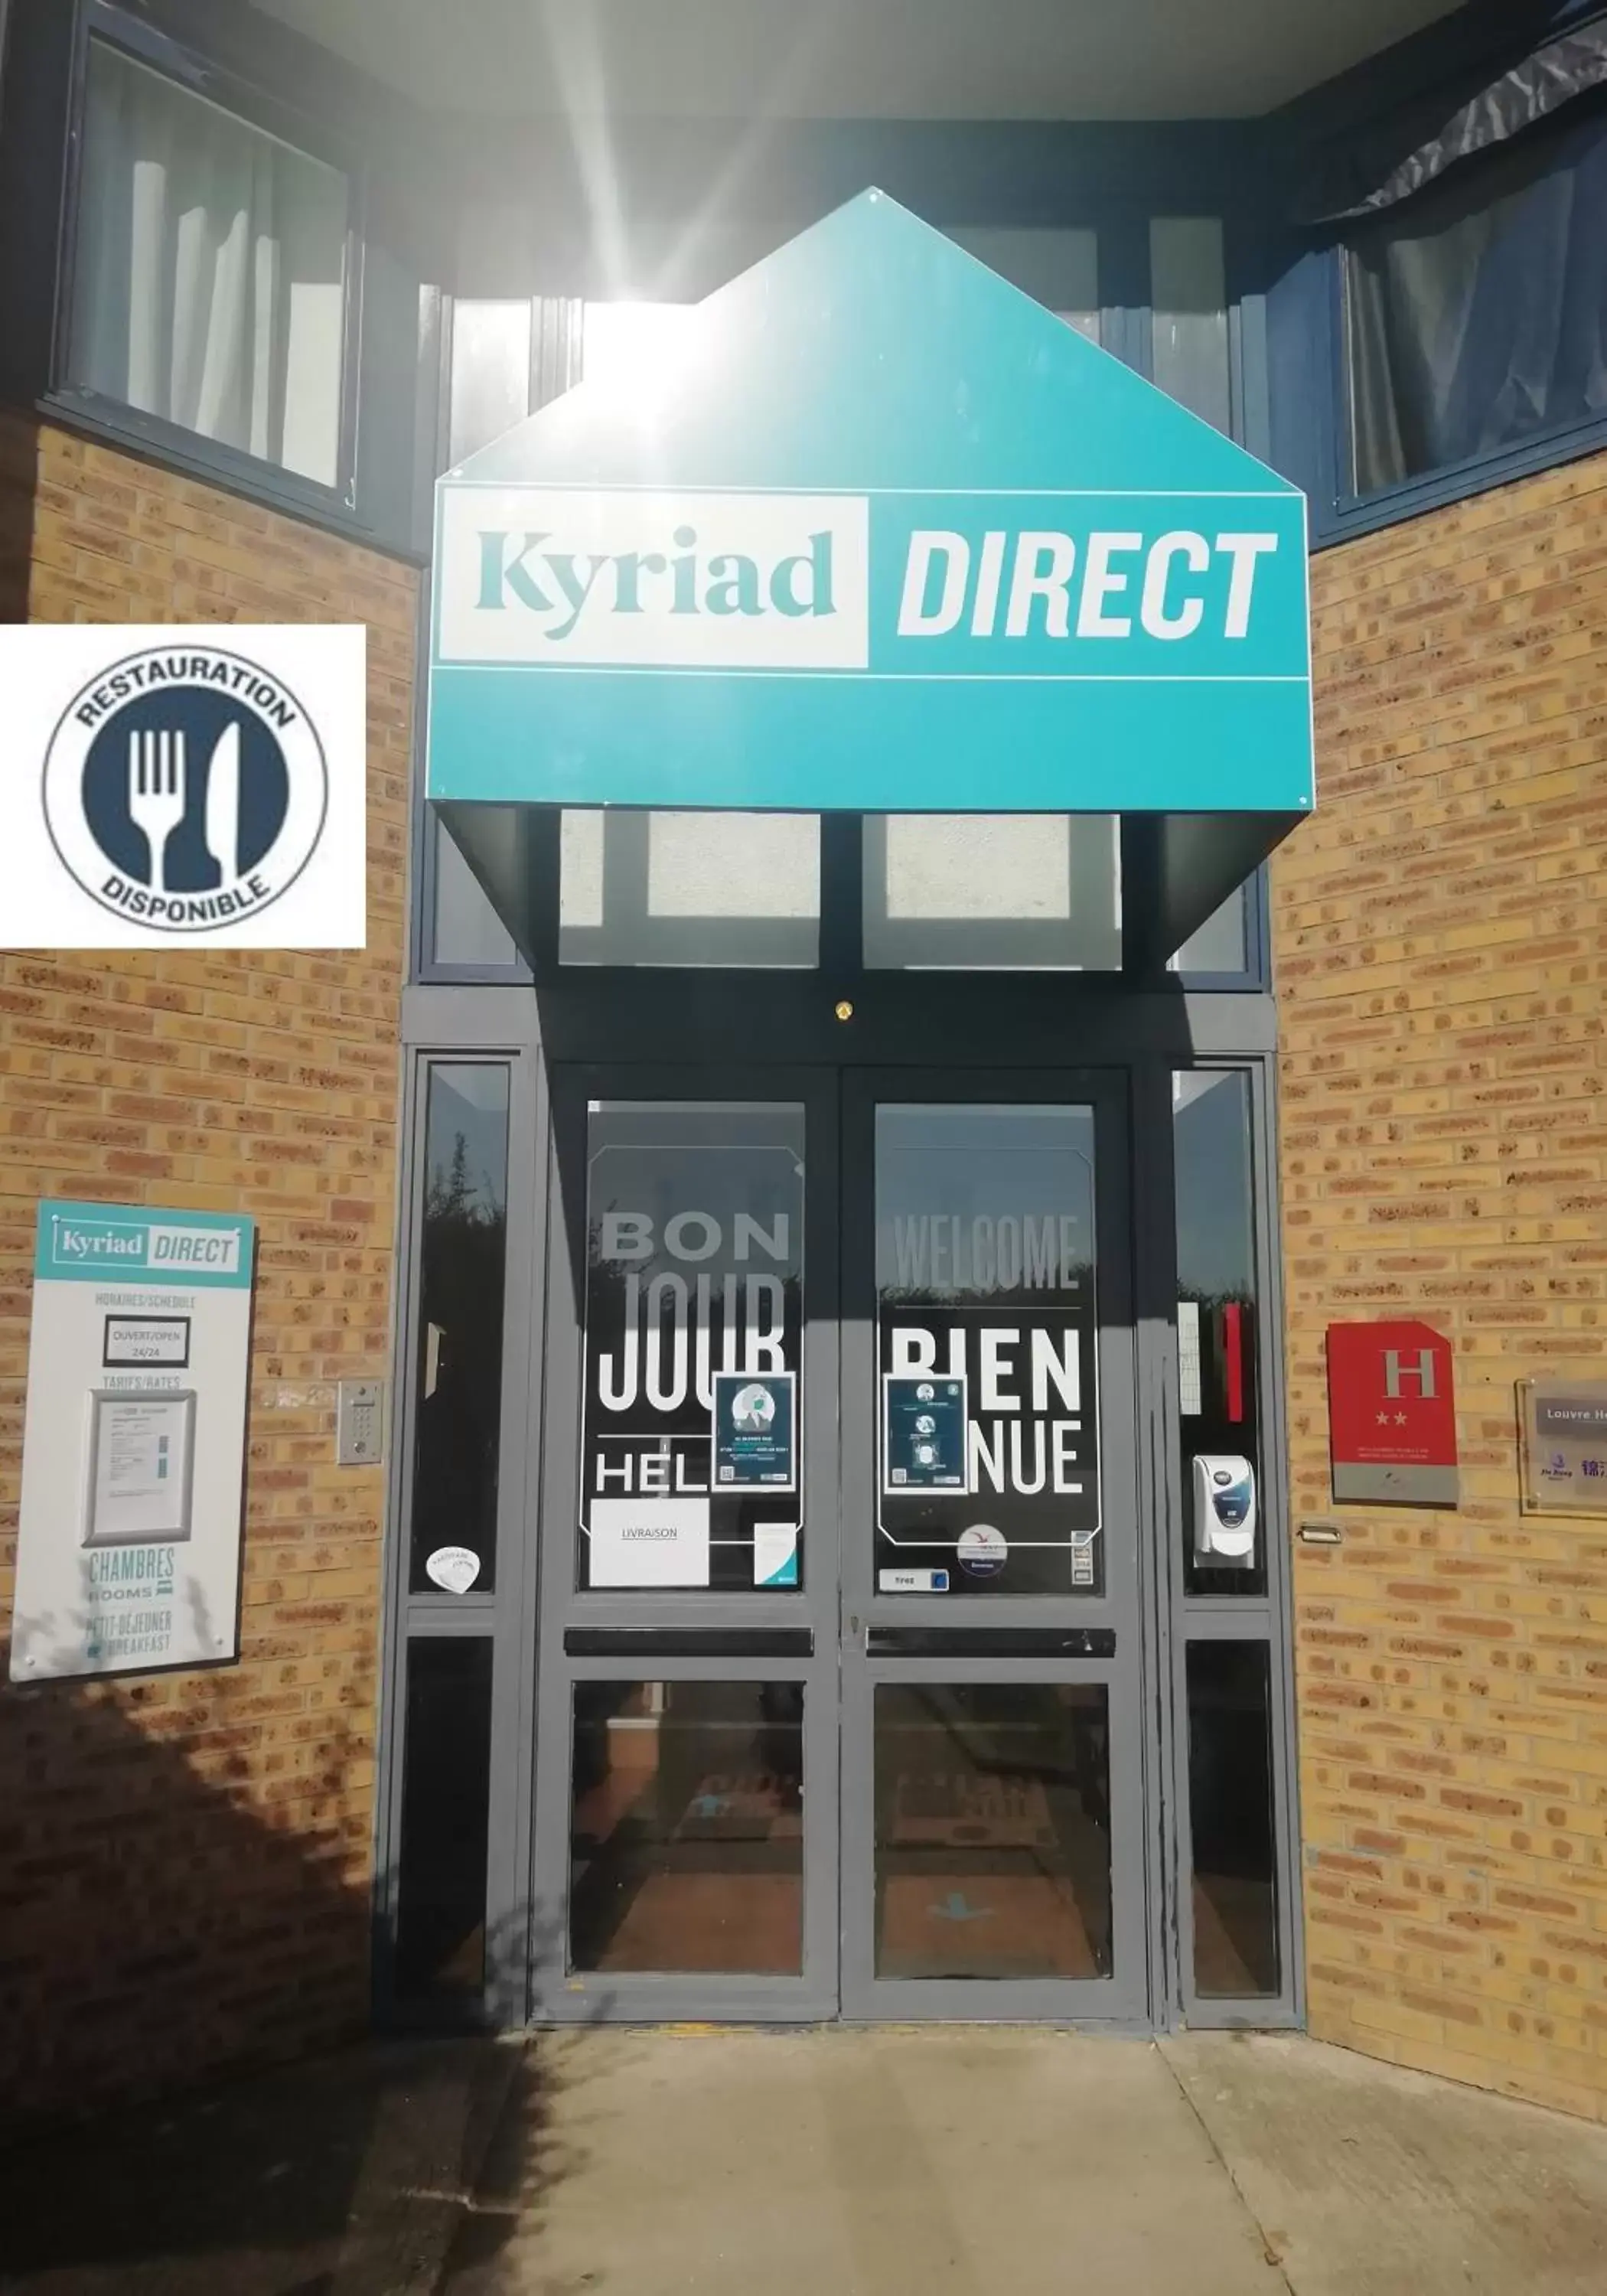 Property building in Kyriad Direct Dreux